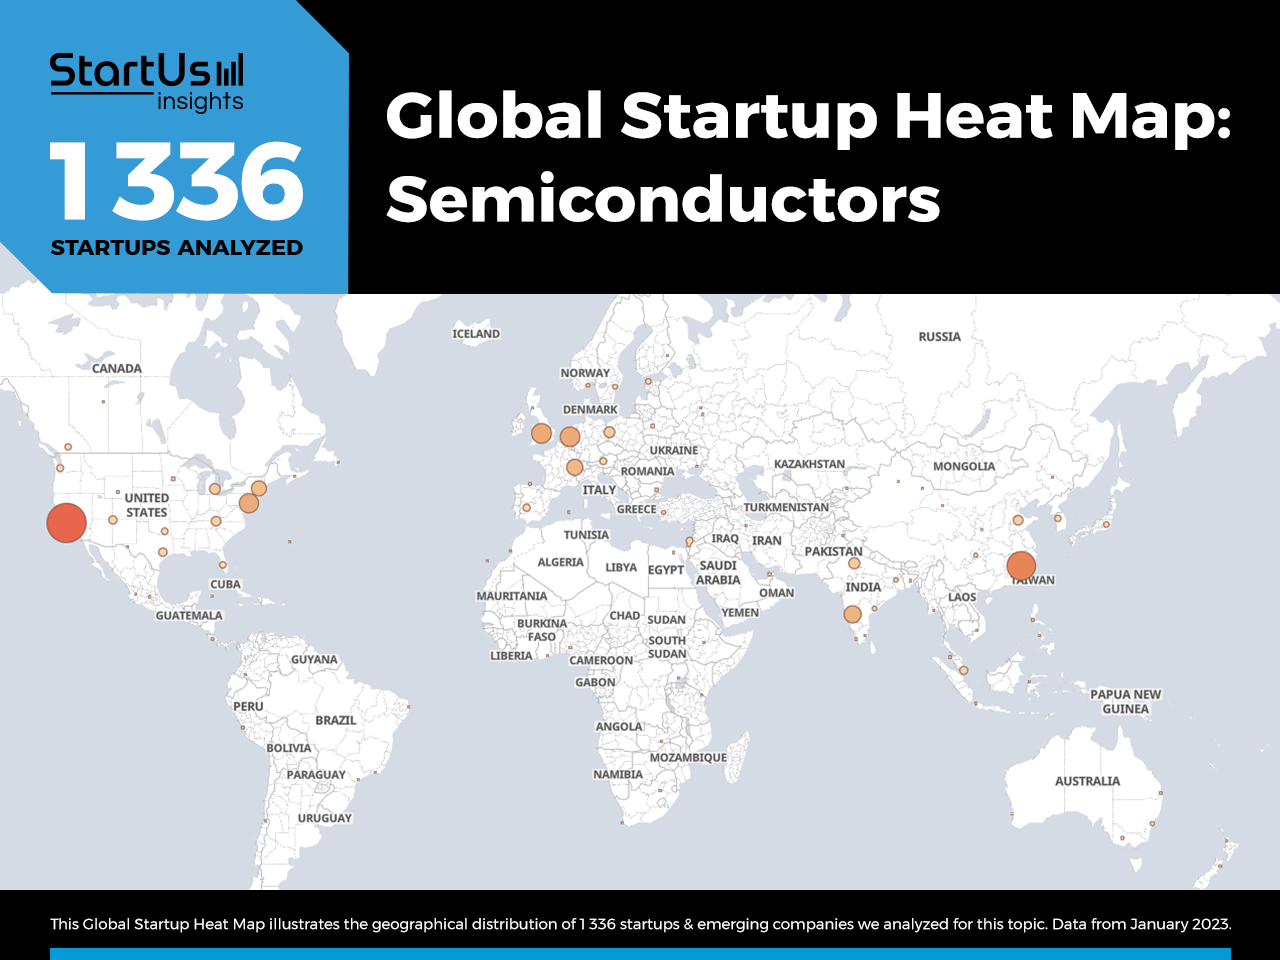 Semiconductors-trends-innovation-Heat-Map-StartUs-Insights-noresize